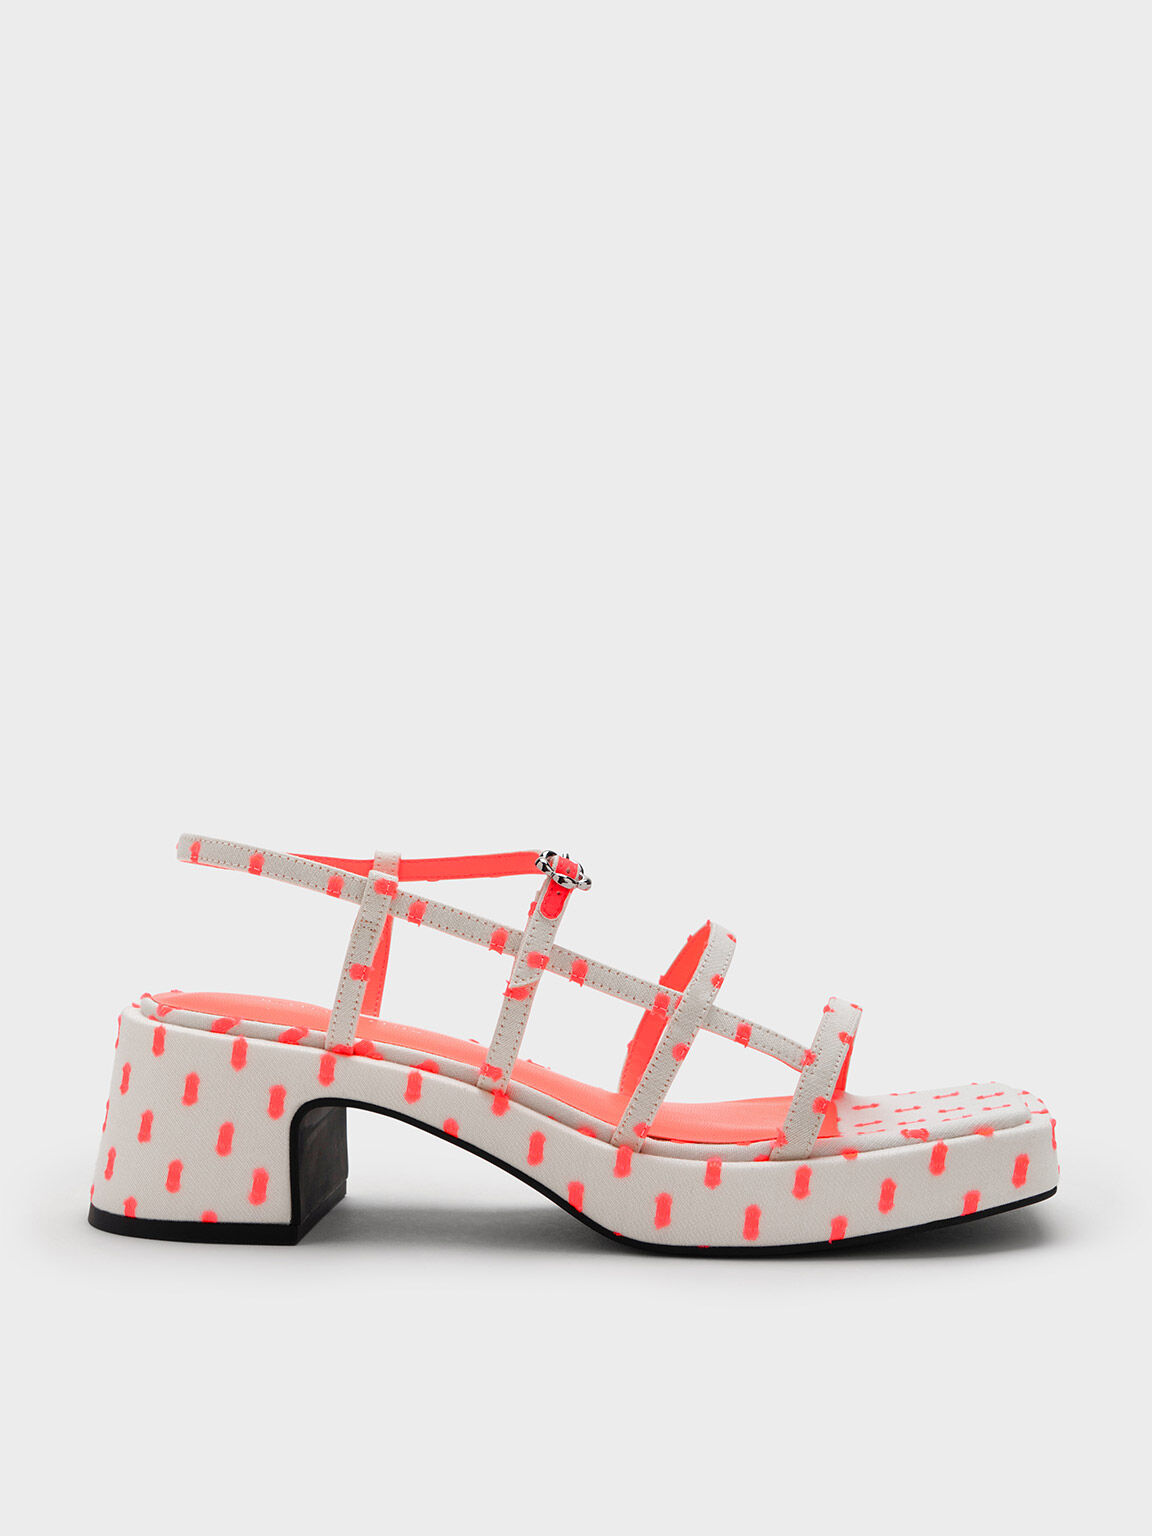 Flower-Buckle Printed Strappy Sandals, Coral Pink, hi-res